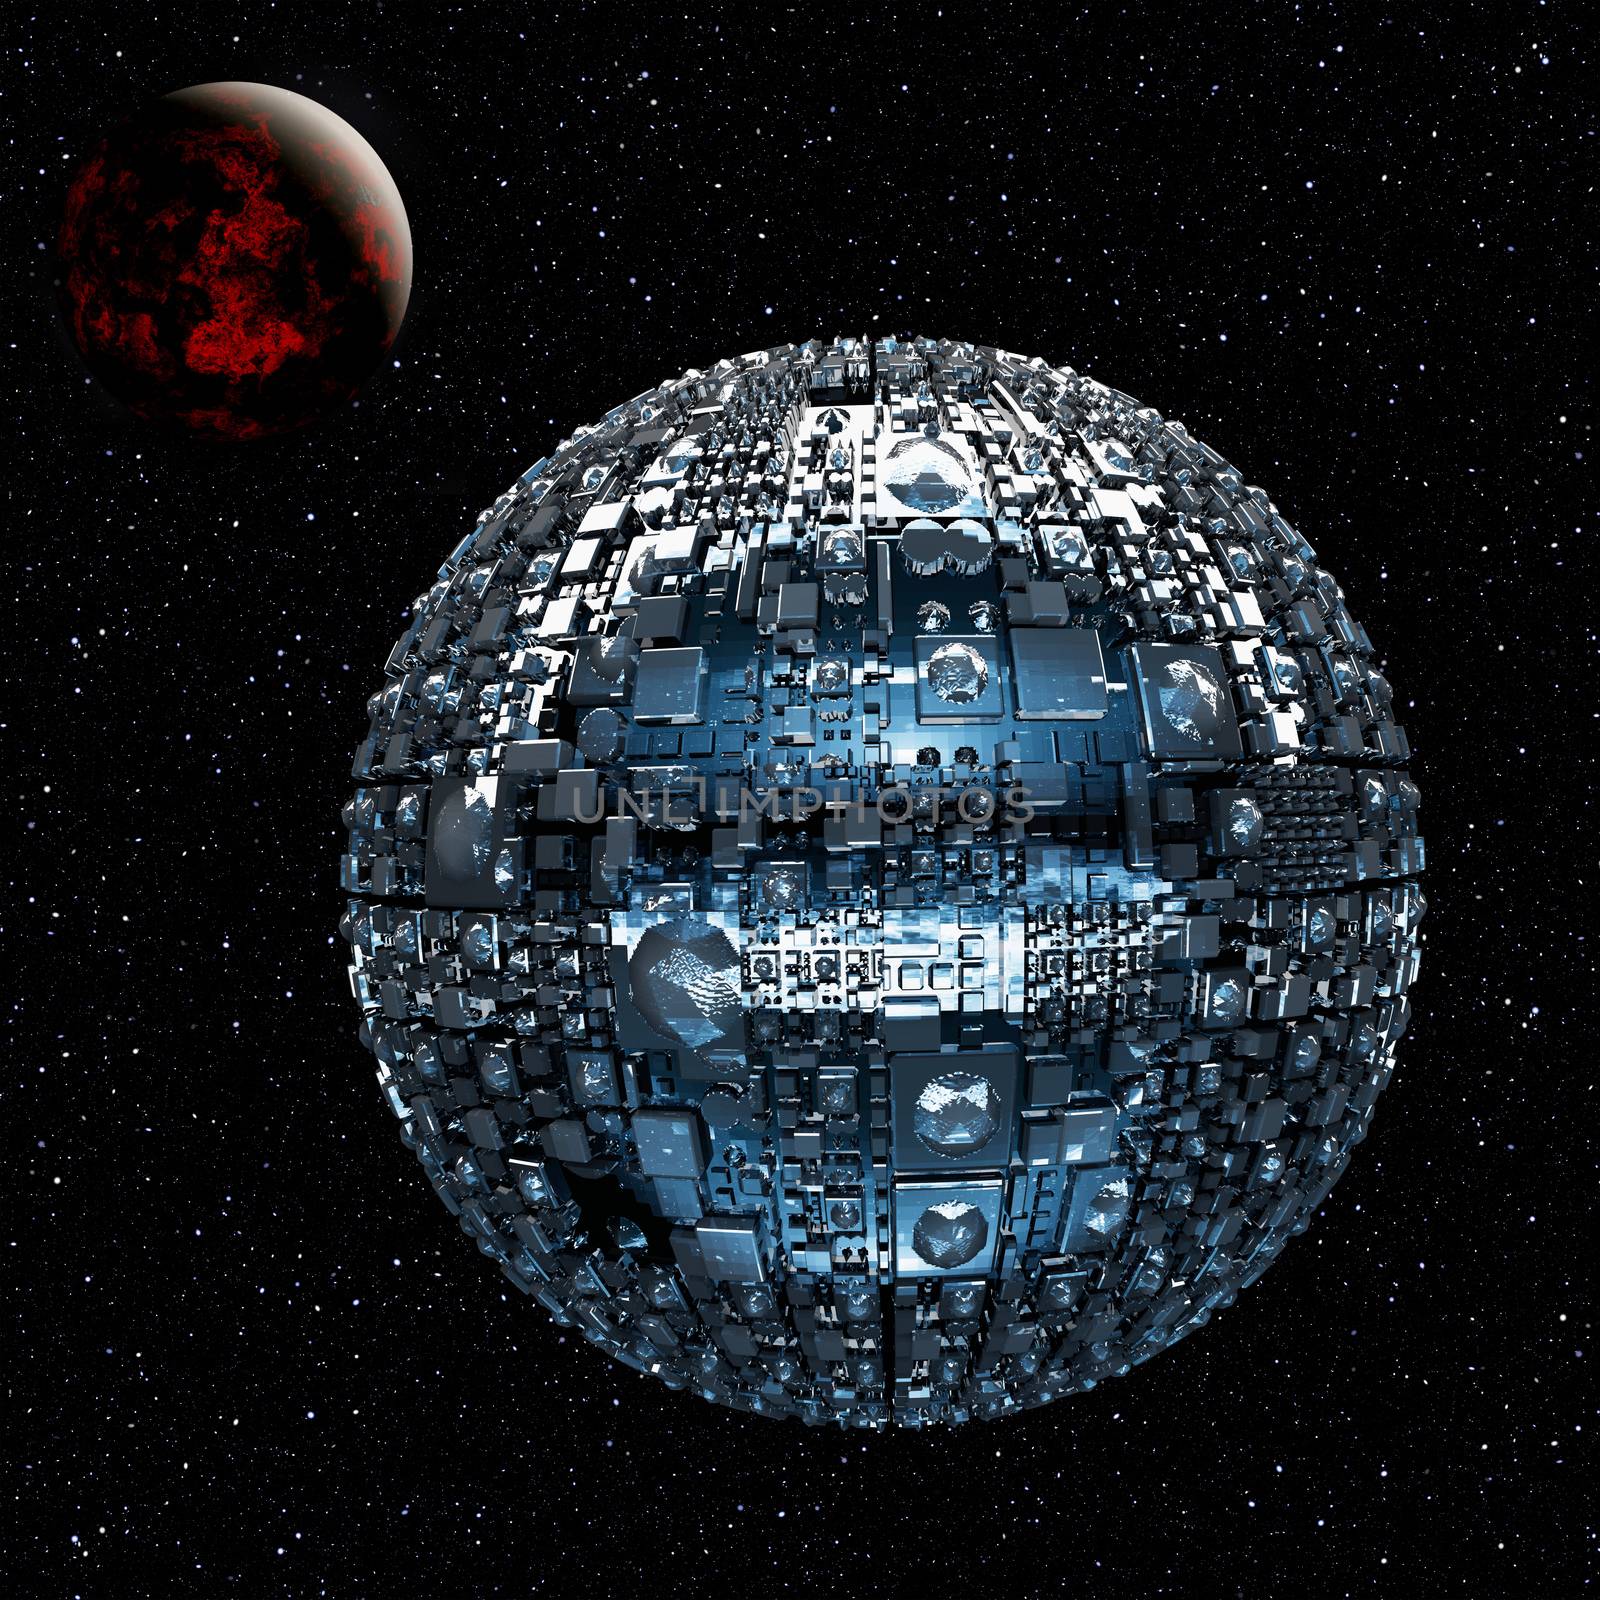 Illustration of a fictional universe with space battle ship and planets